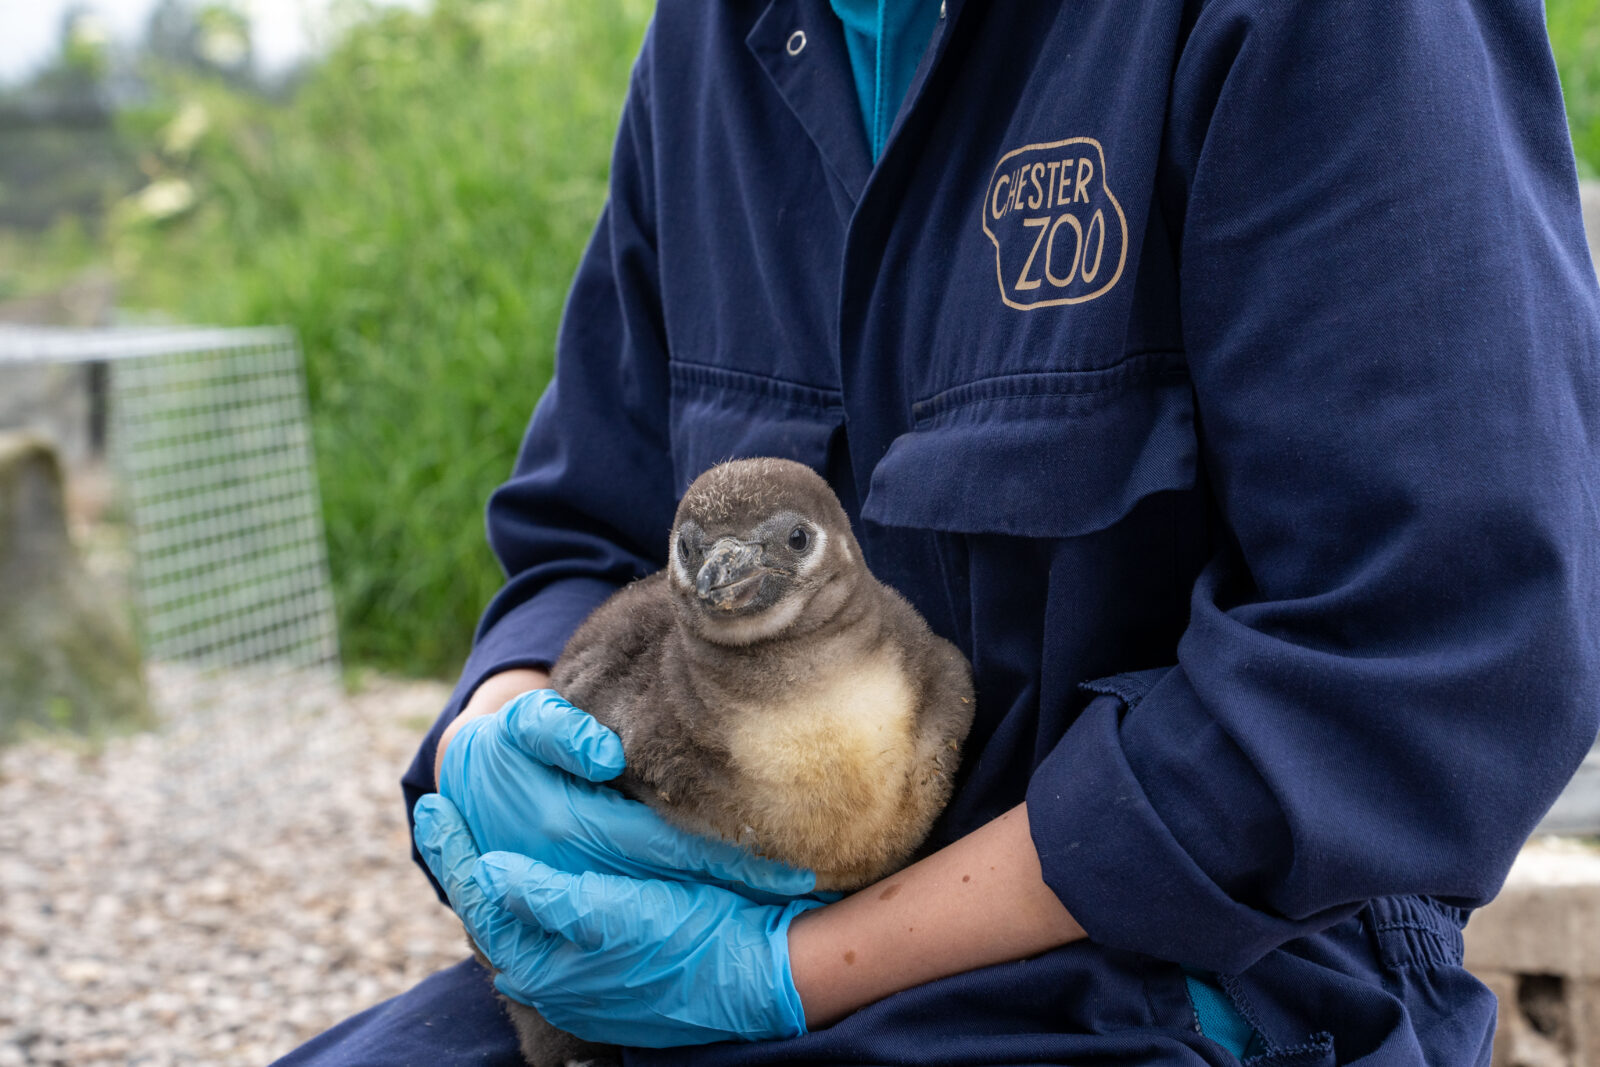 11 new 'highly threatened' penguins have hatched at Chester Zoo / Credit: Chester Zoo